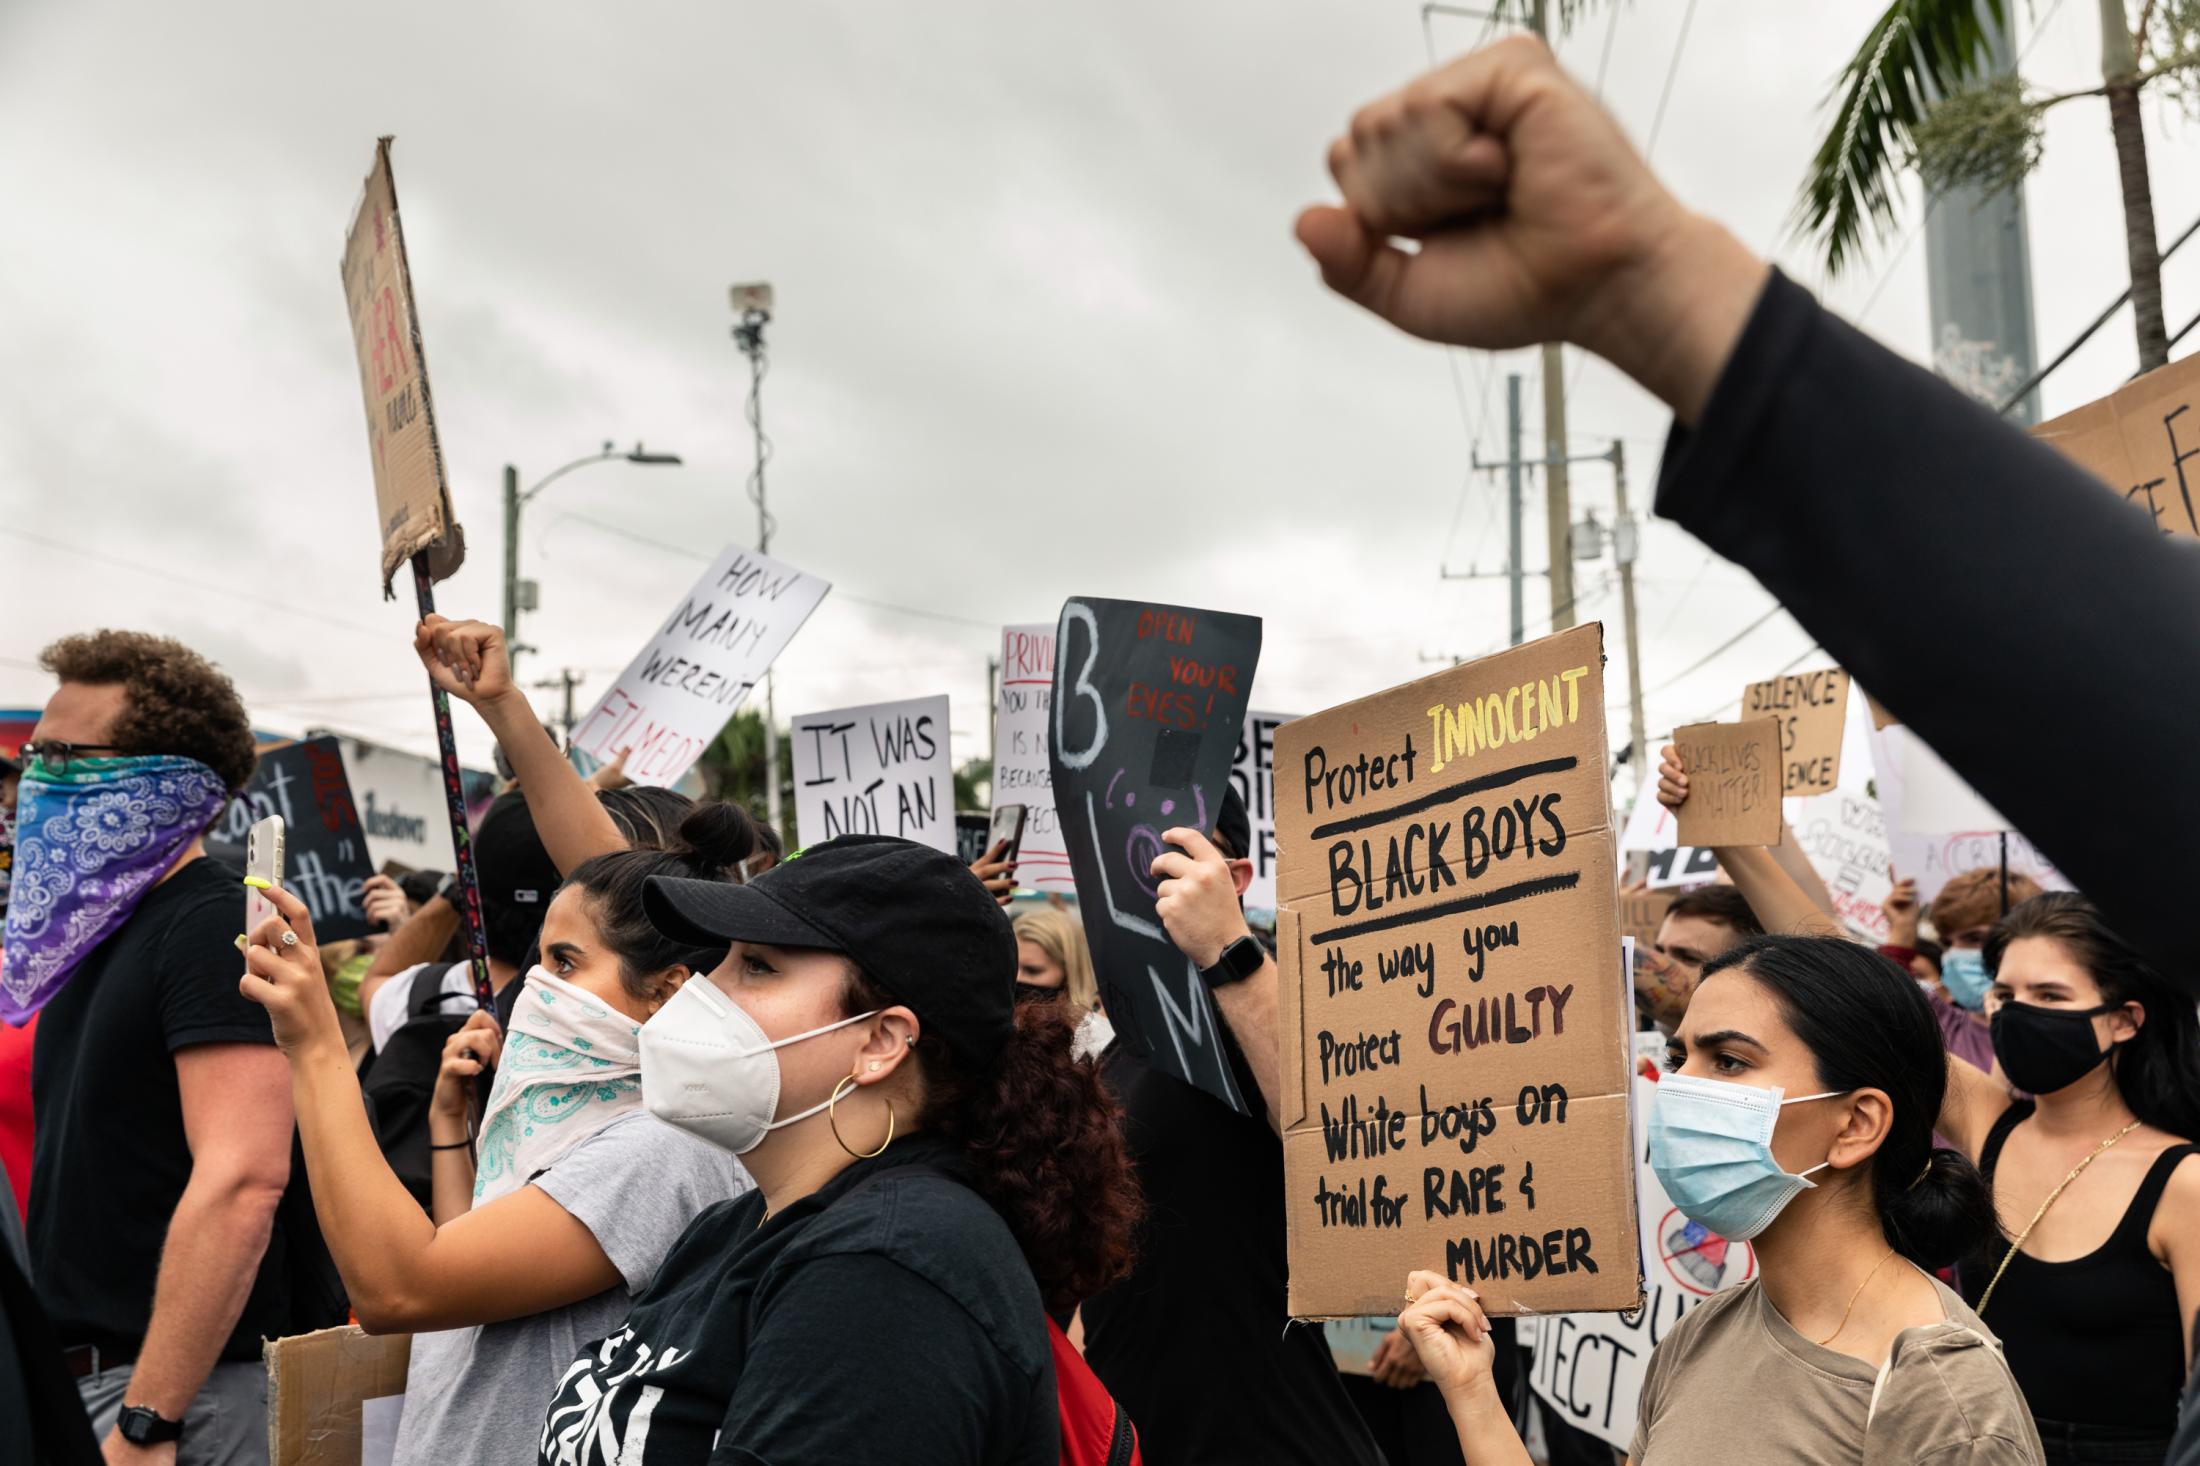 Miami, Black Lives Matter Protests - BLM Protest in Wynwood, Miami, Florida June 5, 2020